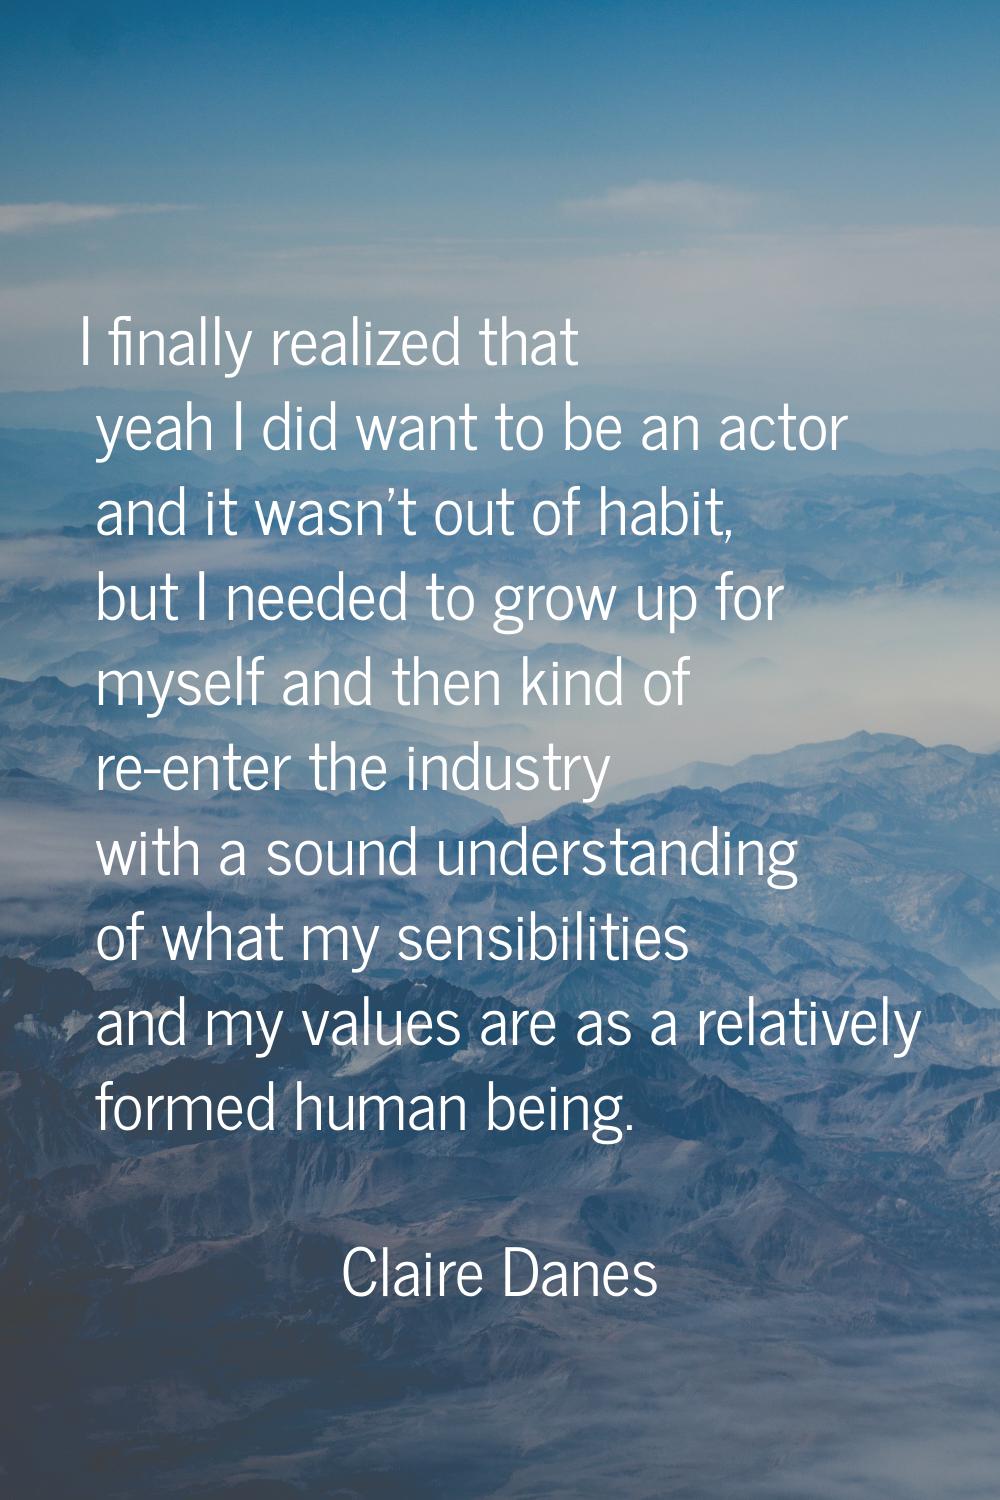 I finally realized that yeah I did want to be an actor and it wasn't out of habit, but I needed to 